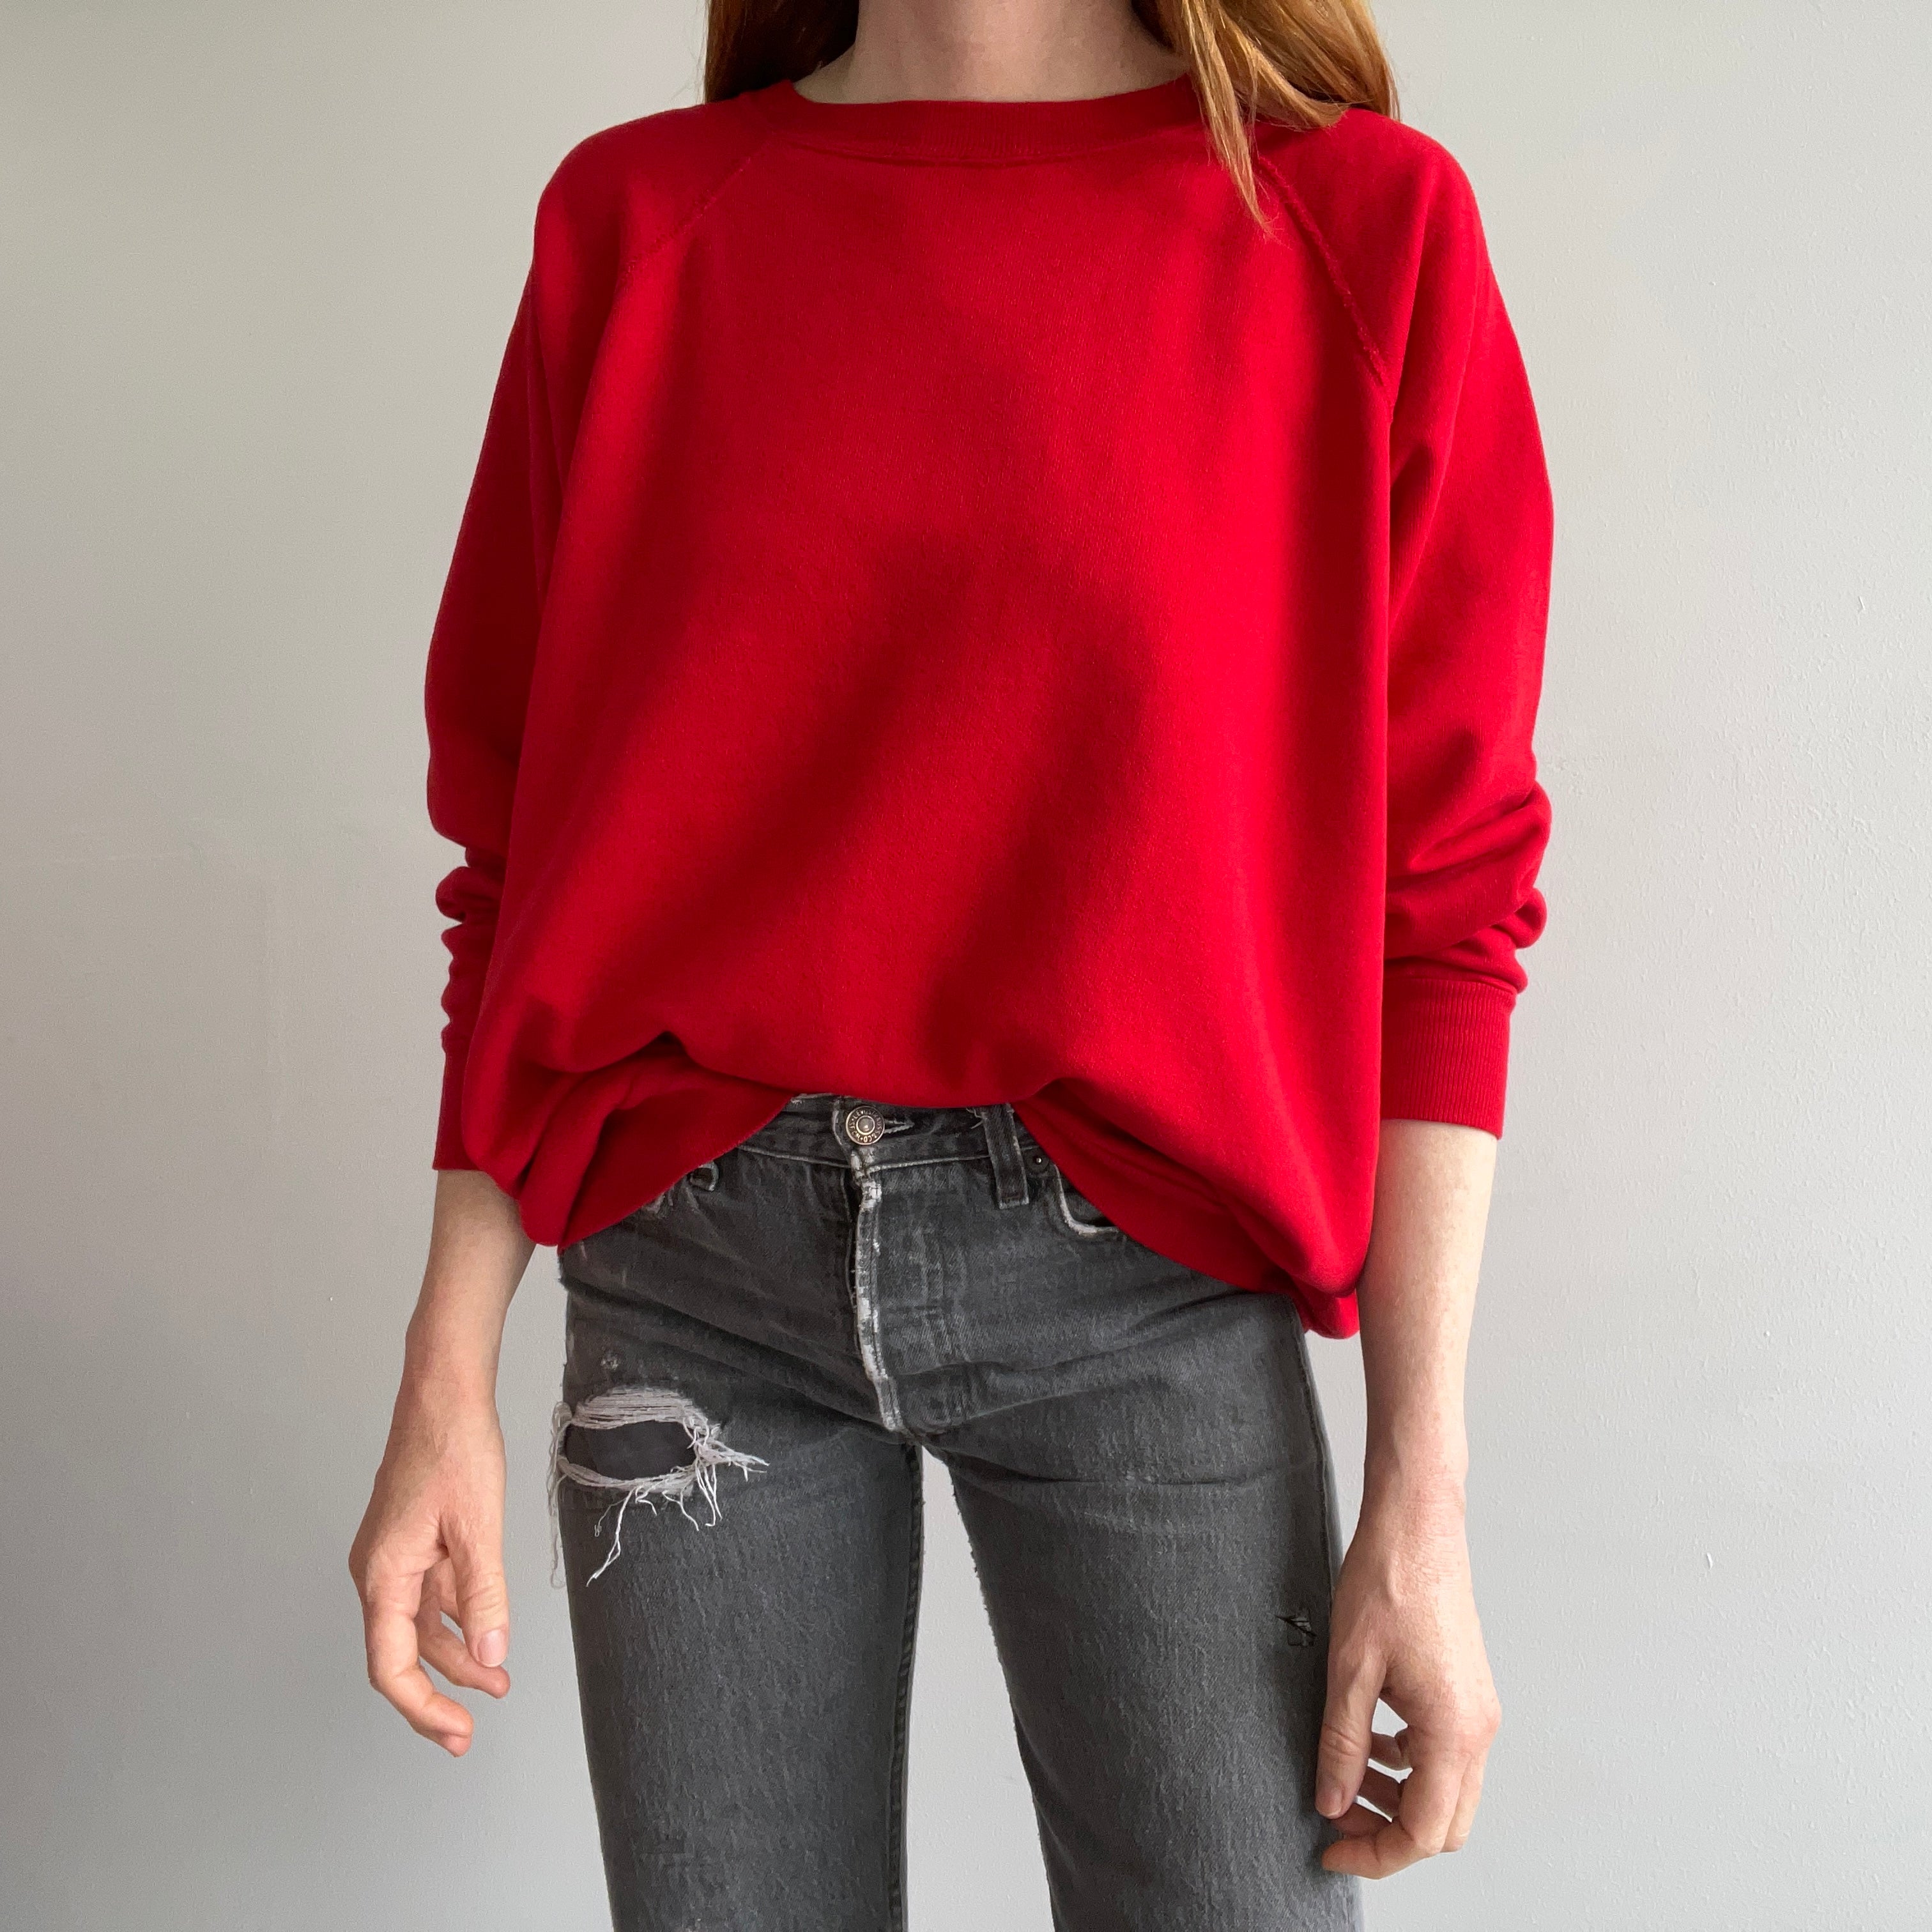 1980s Dream Boat Blank Red Relaxed Fit Sweatshirt - THIS!!!!